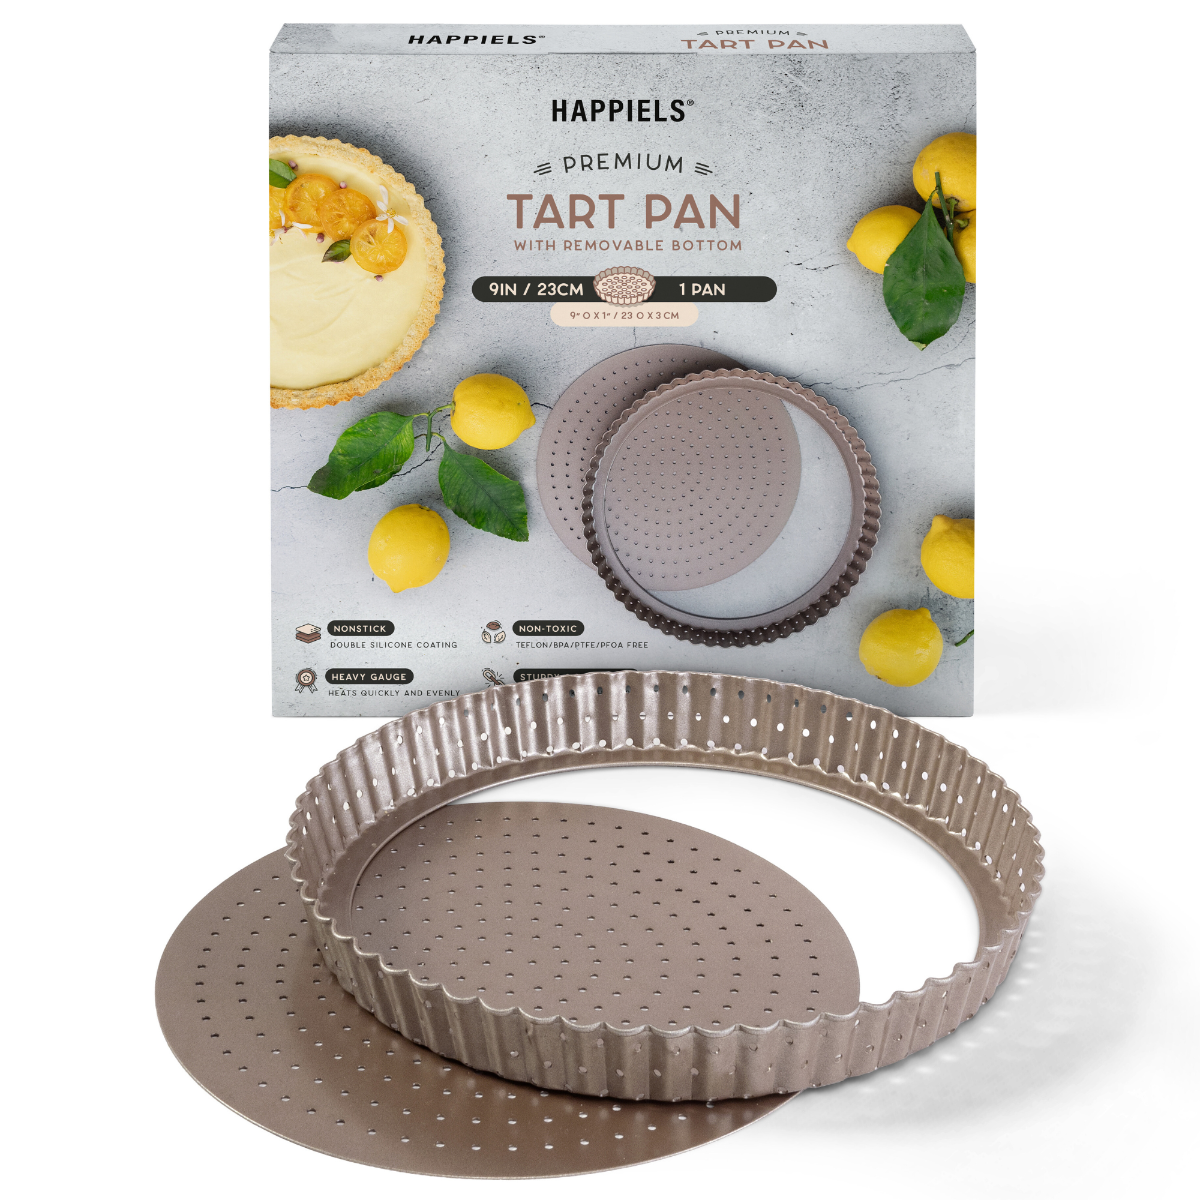 happiels 9 tart pan with removable bottom fluted perforated